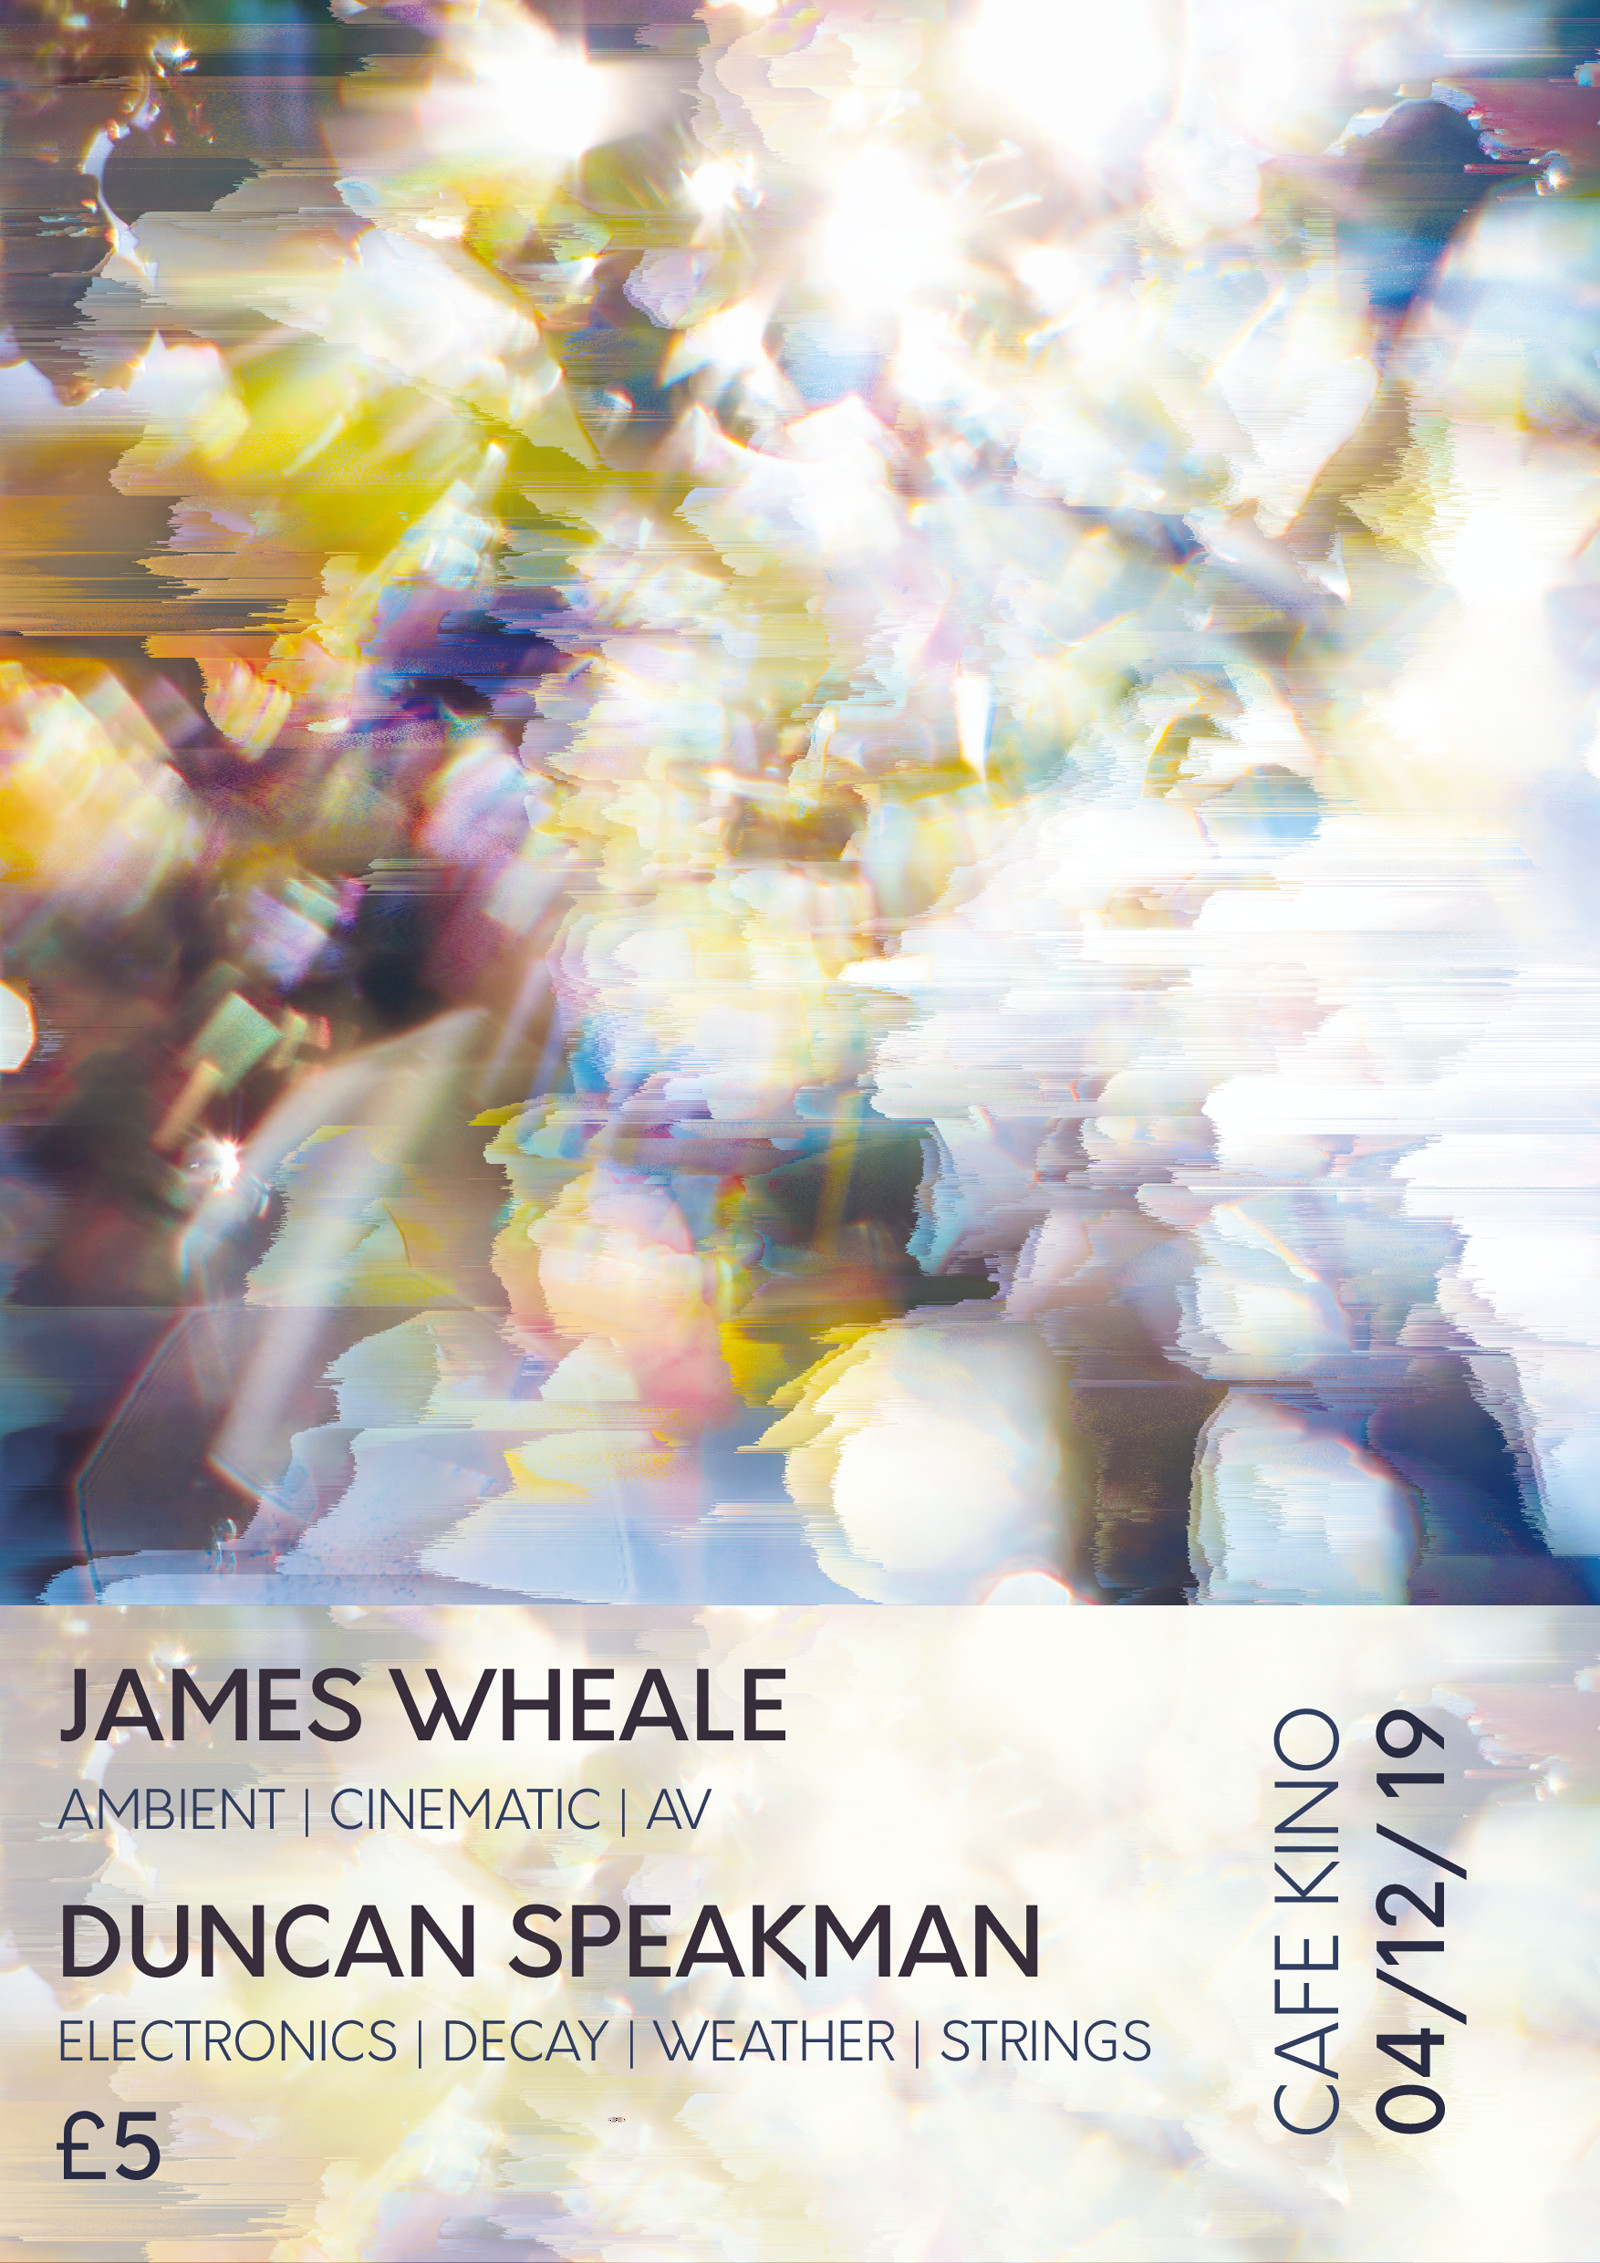 James Wheale + Duncan Speakman at Cafe Kino